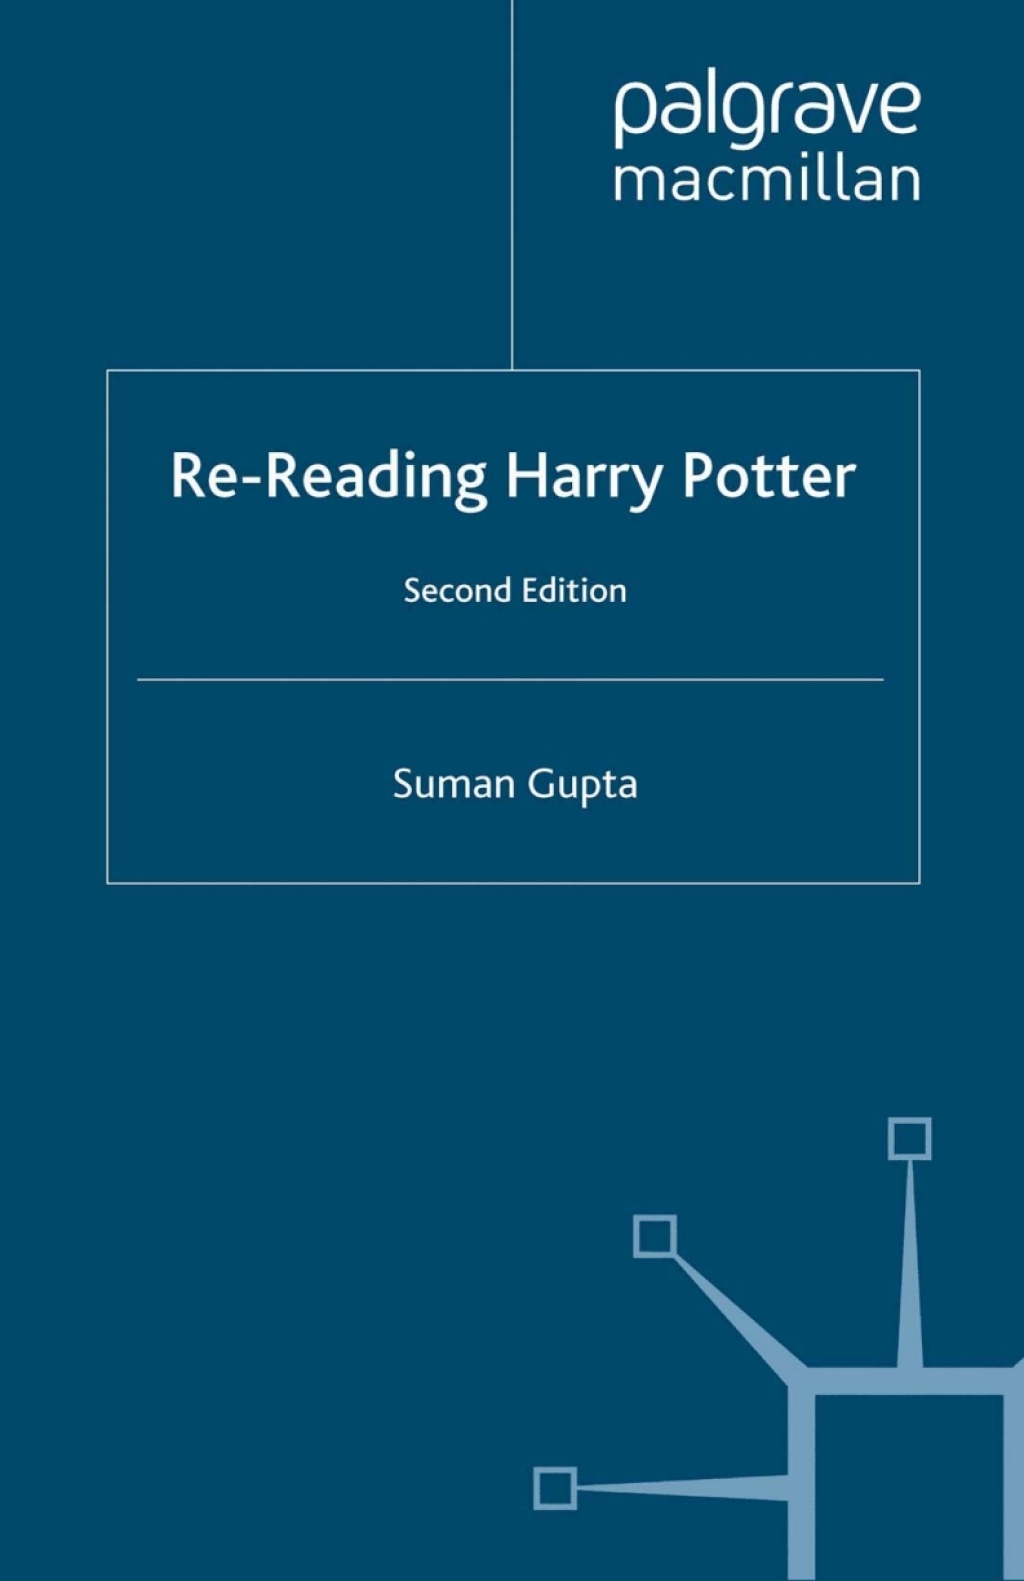 Re-Reading Harry Potter - 2nd Edition (eBook)